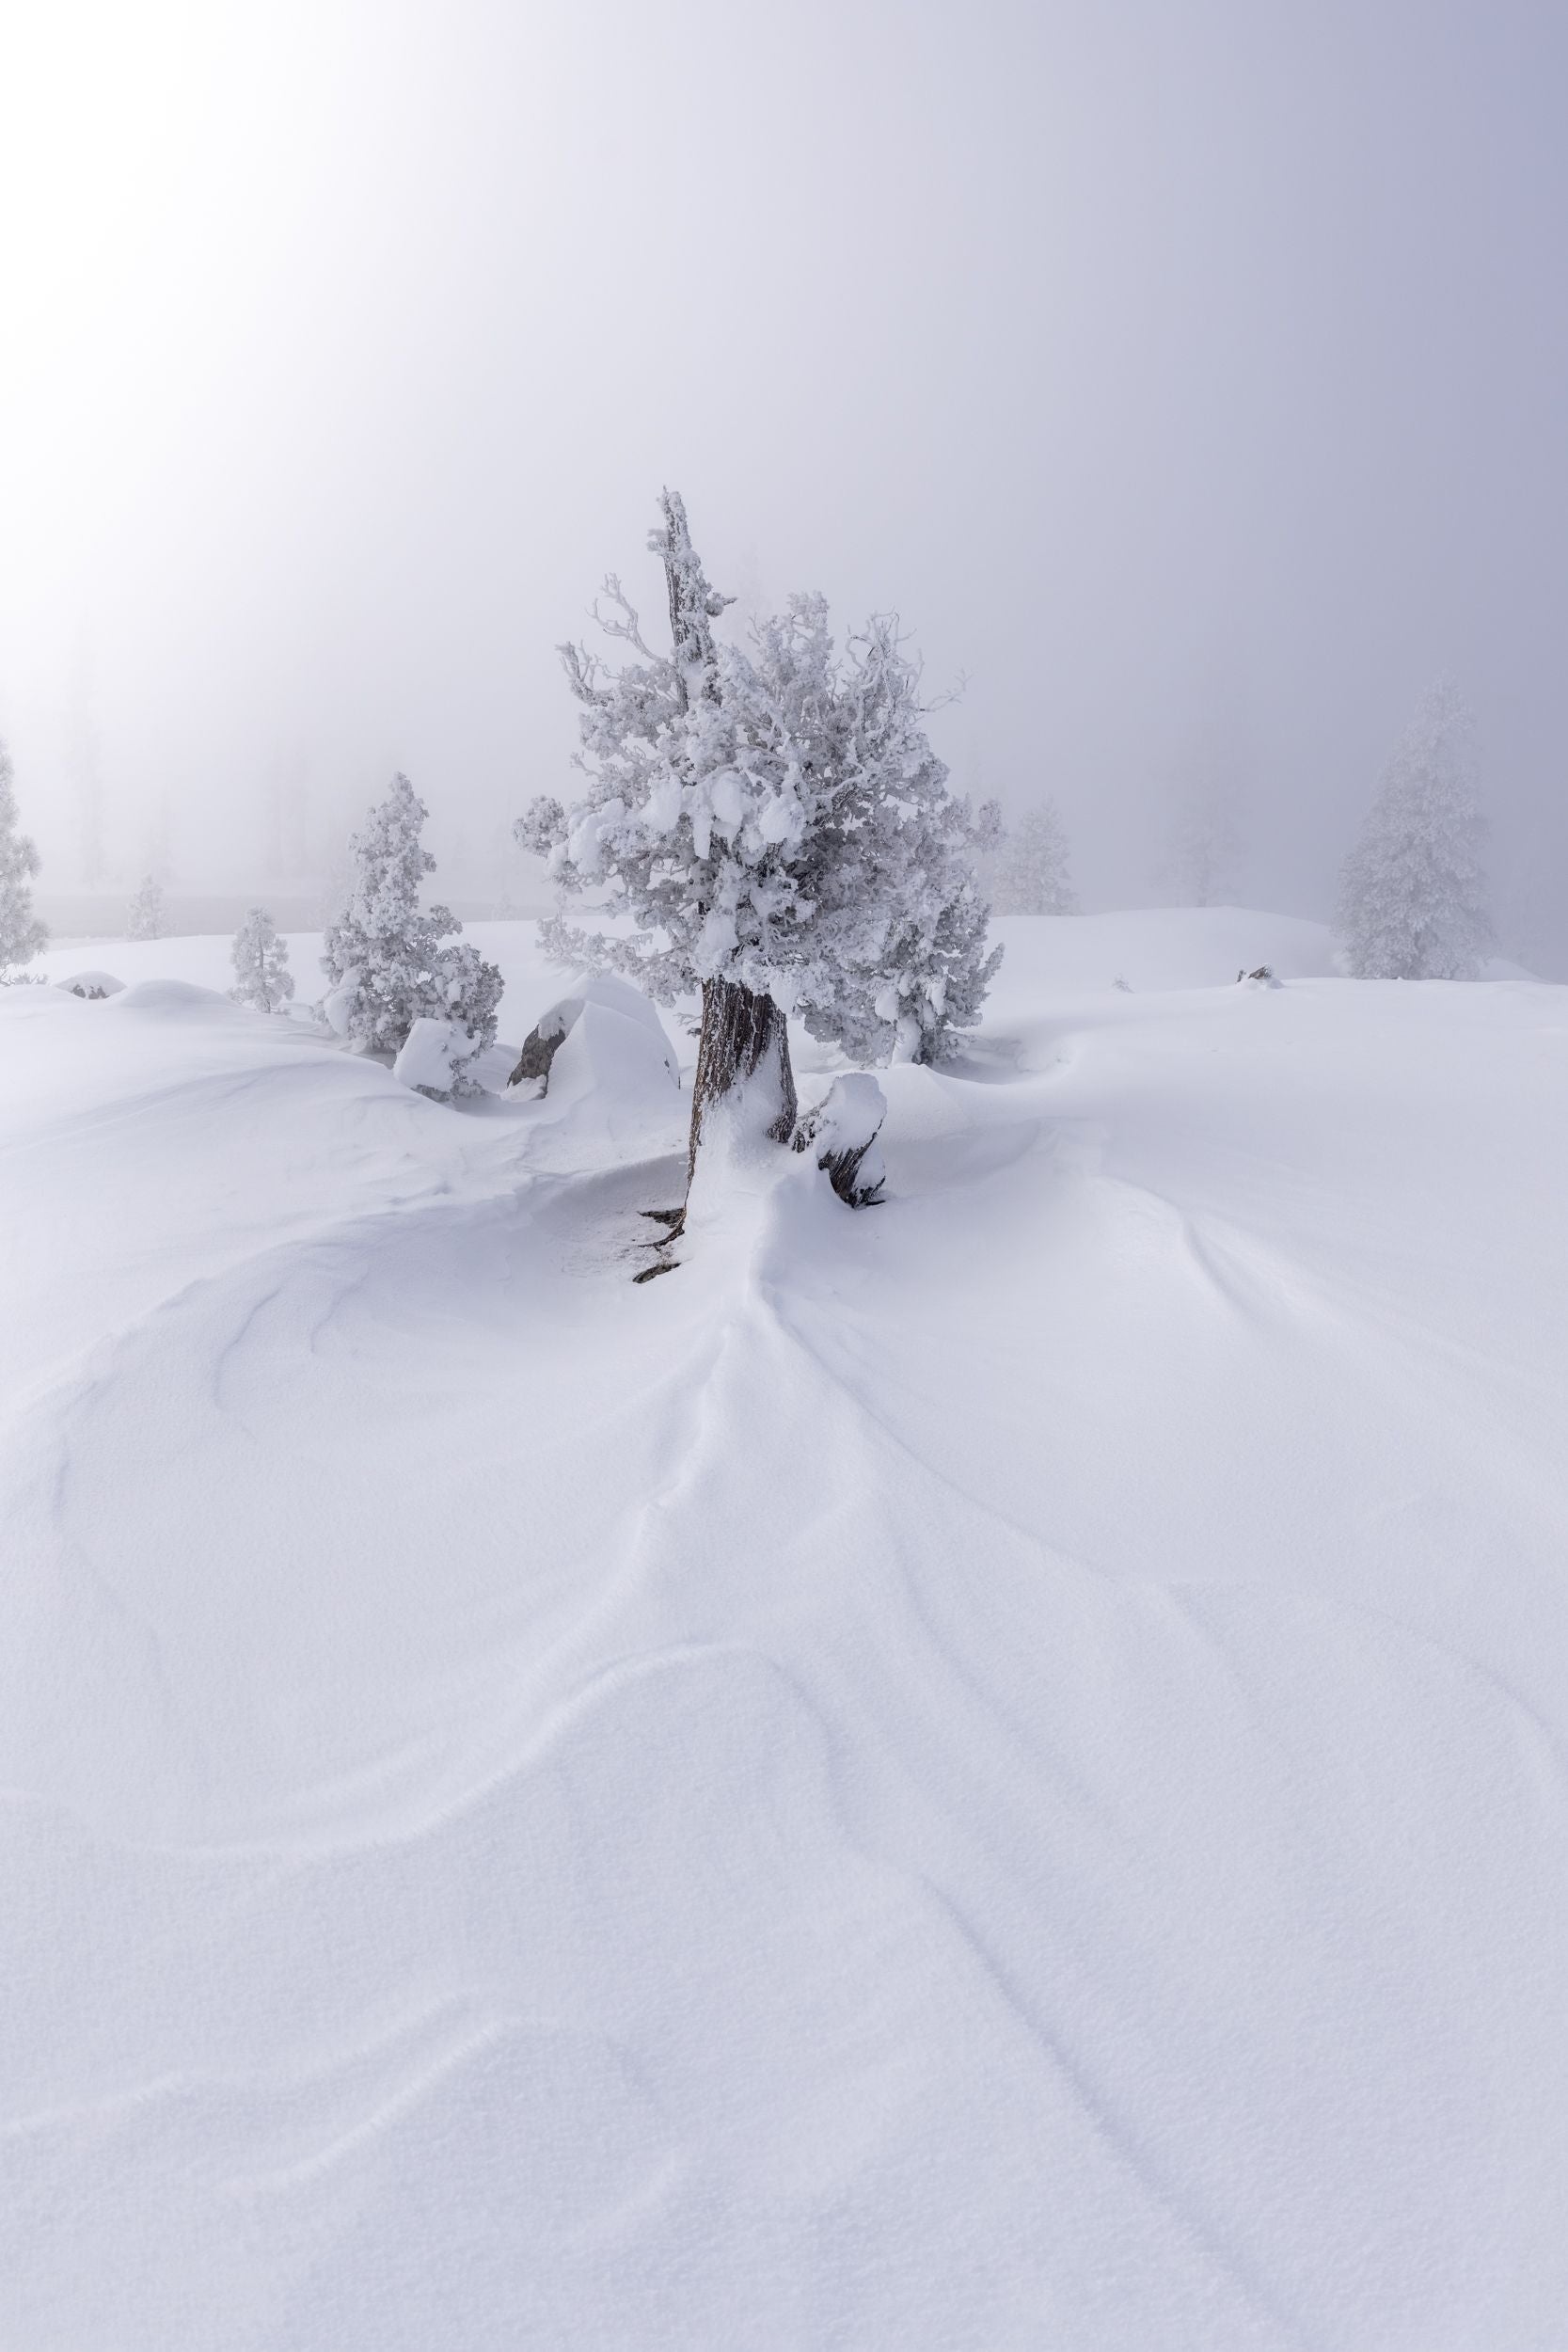 Snow drifts up against a tree trunk of a snowy tree.